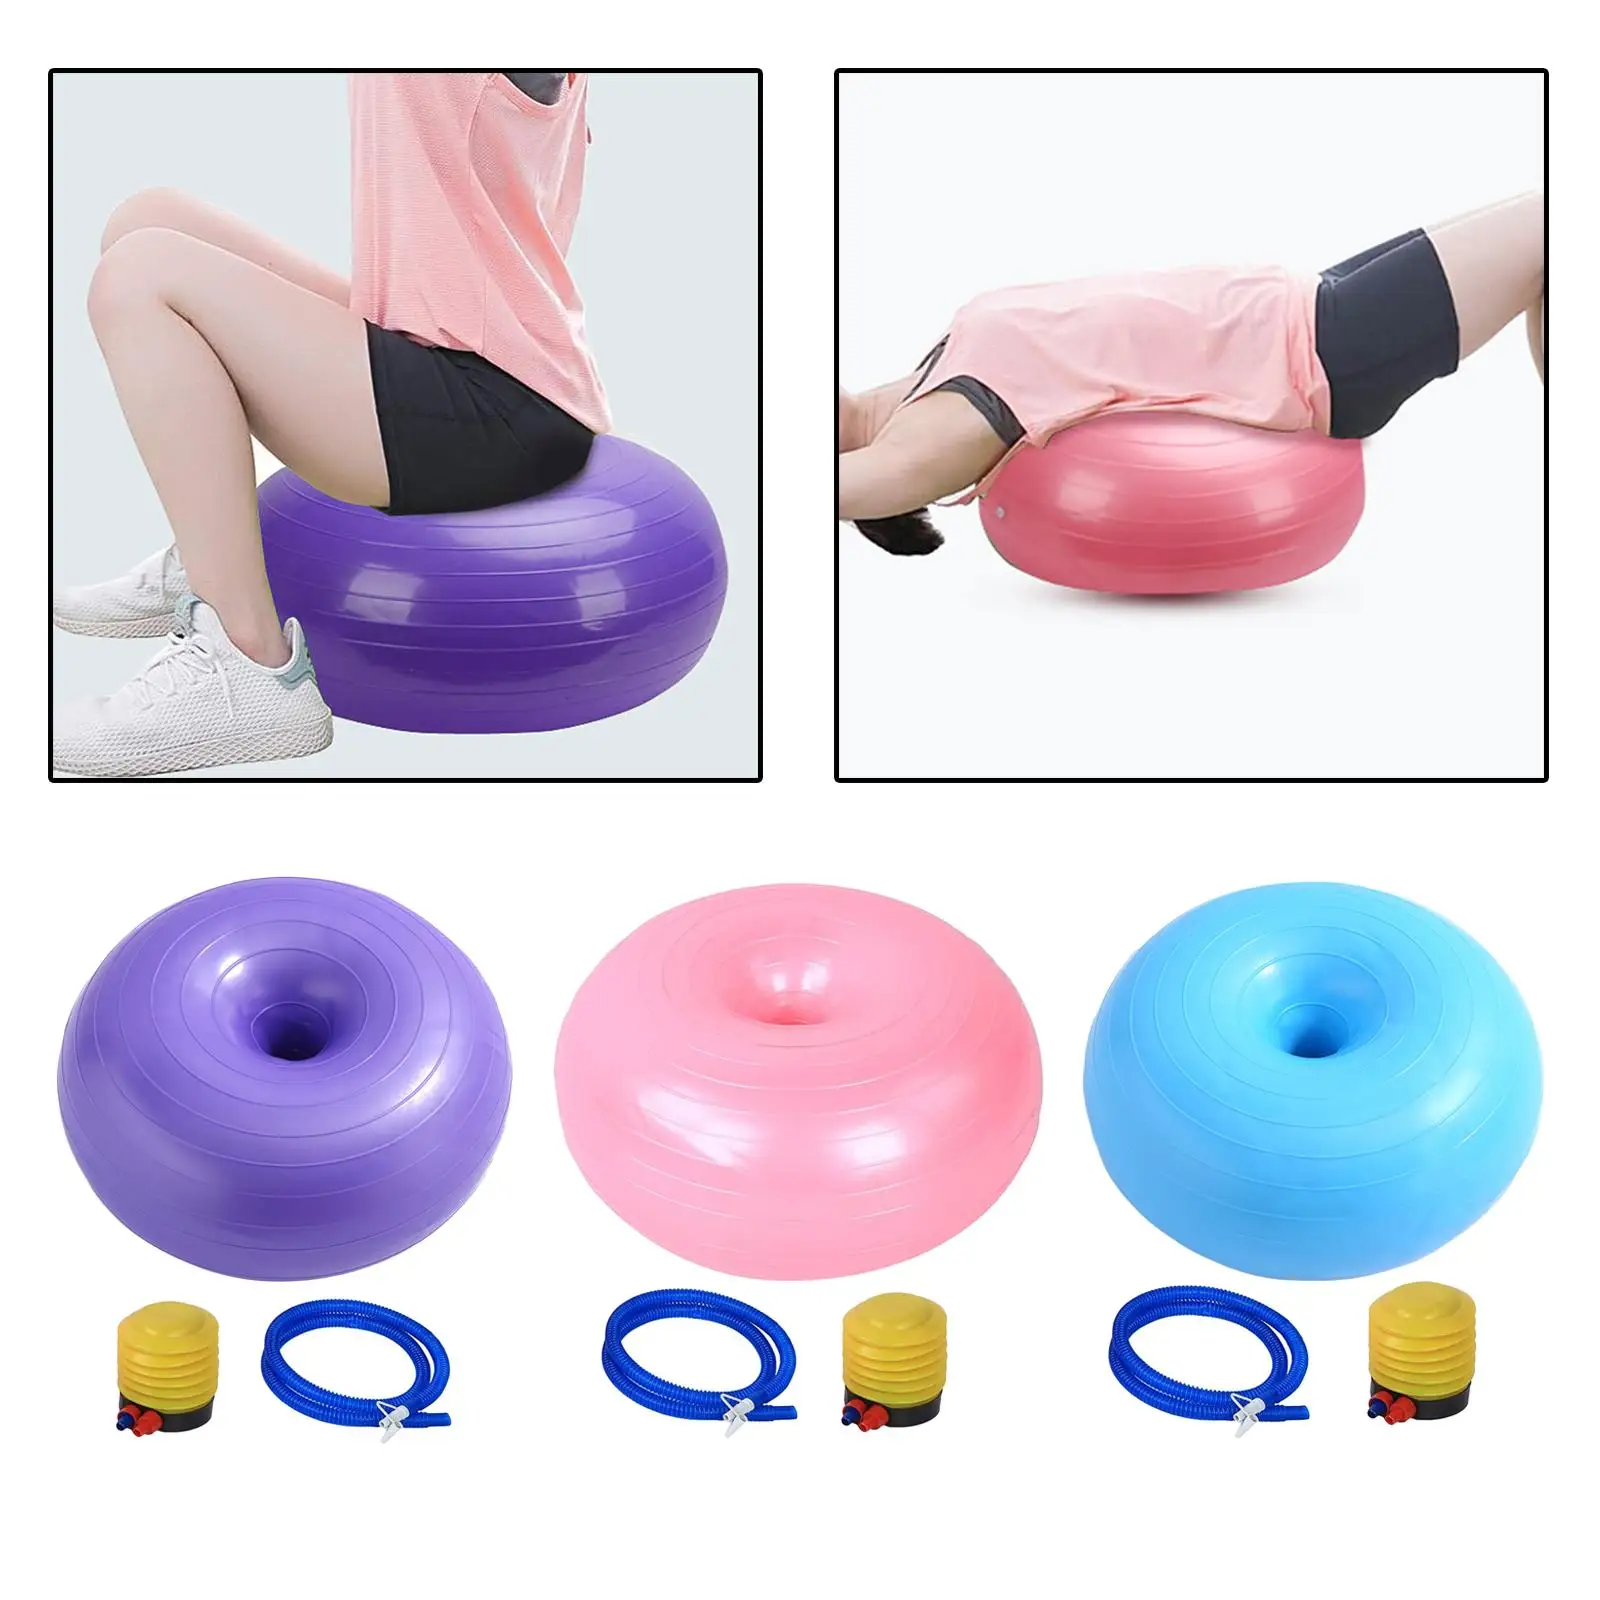 Exercise Ball - Extra Thick Yoga Ball with Quick Pump - Anti-Burst and Slip